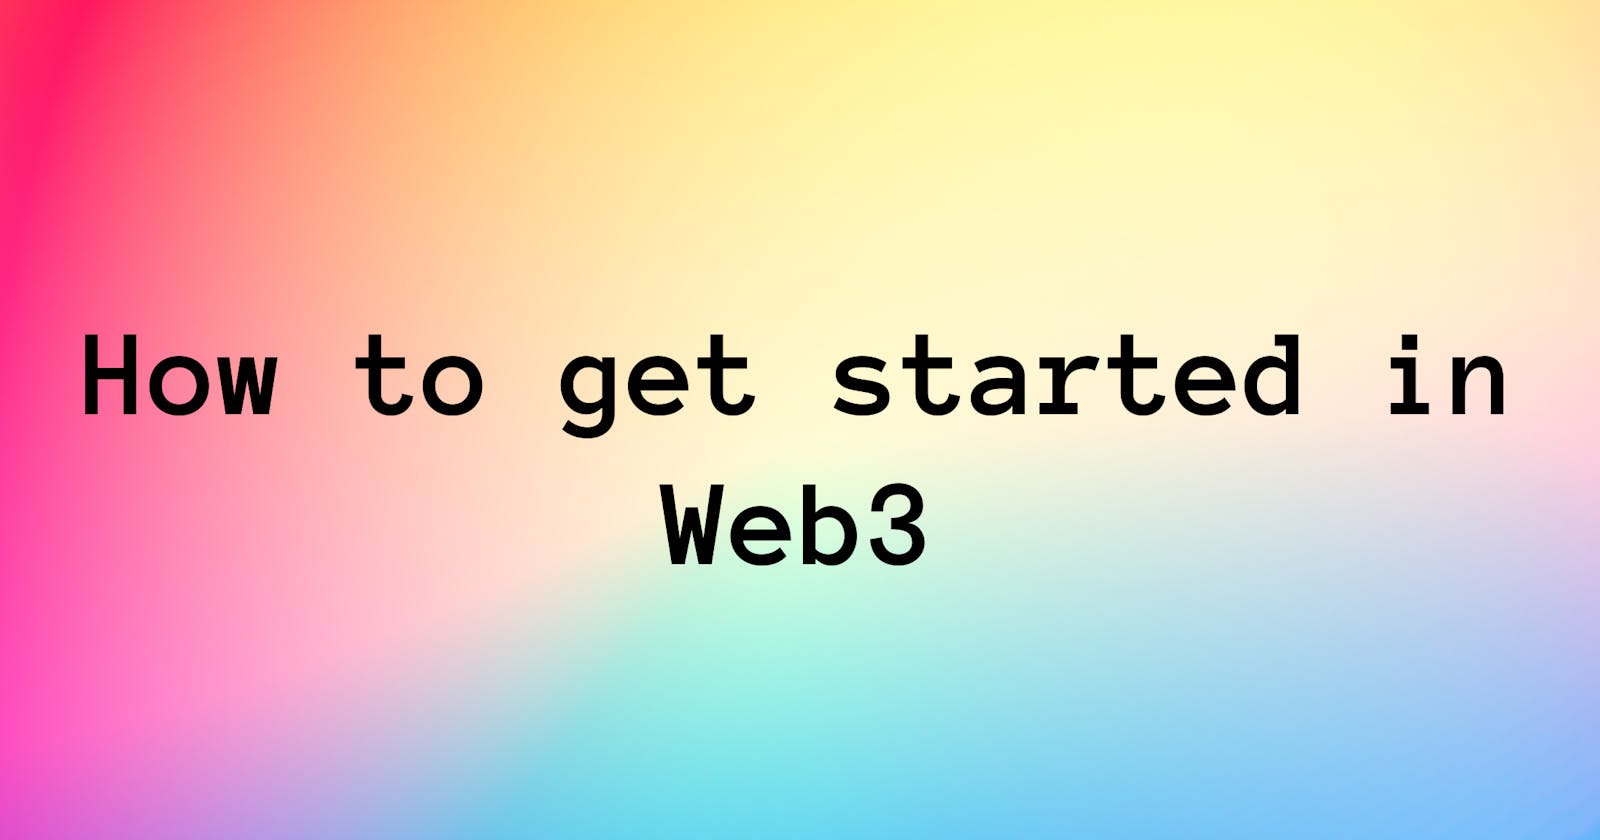 How to get started in Web3